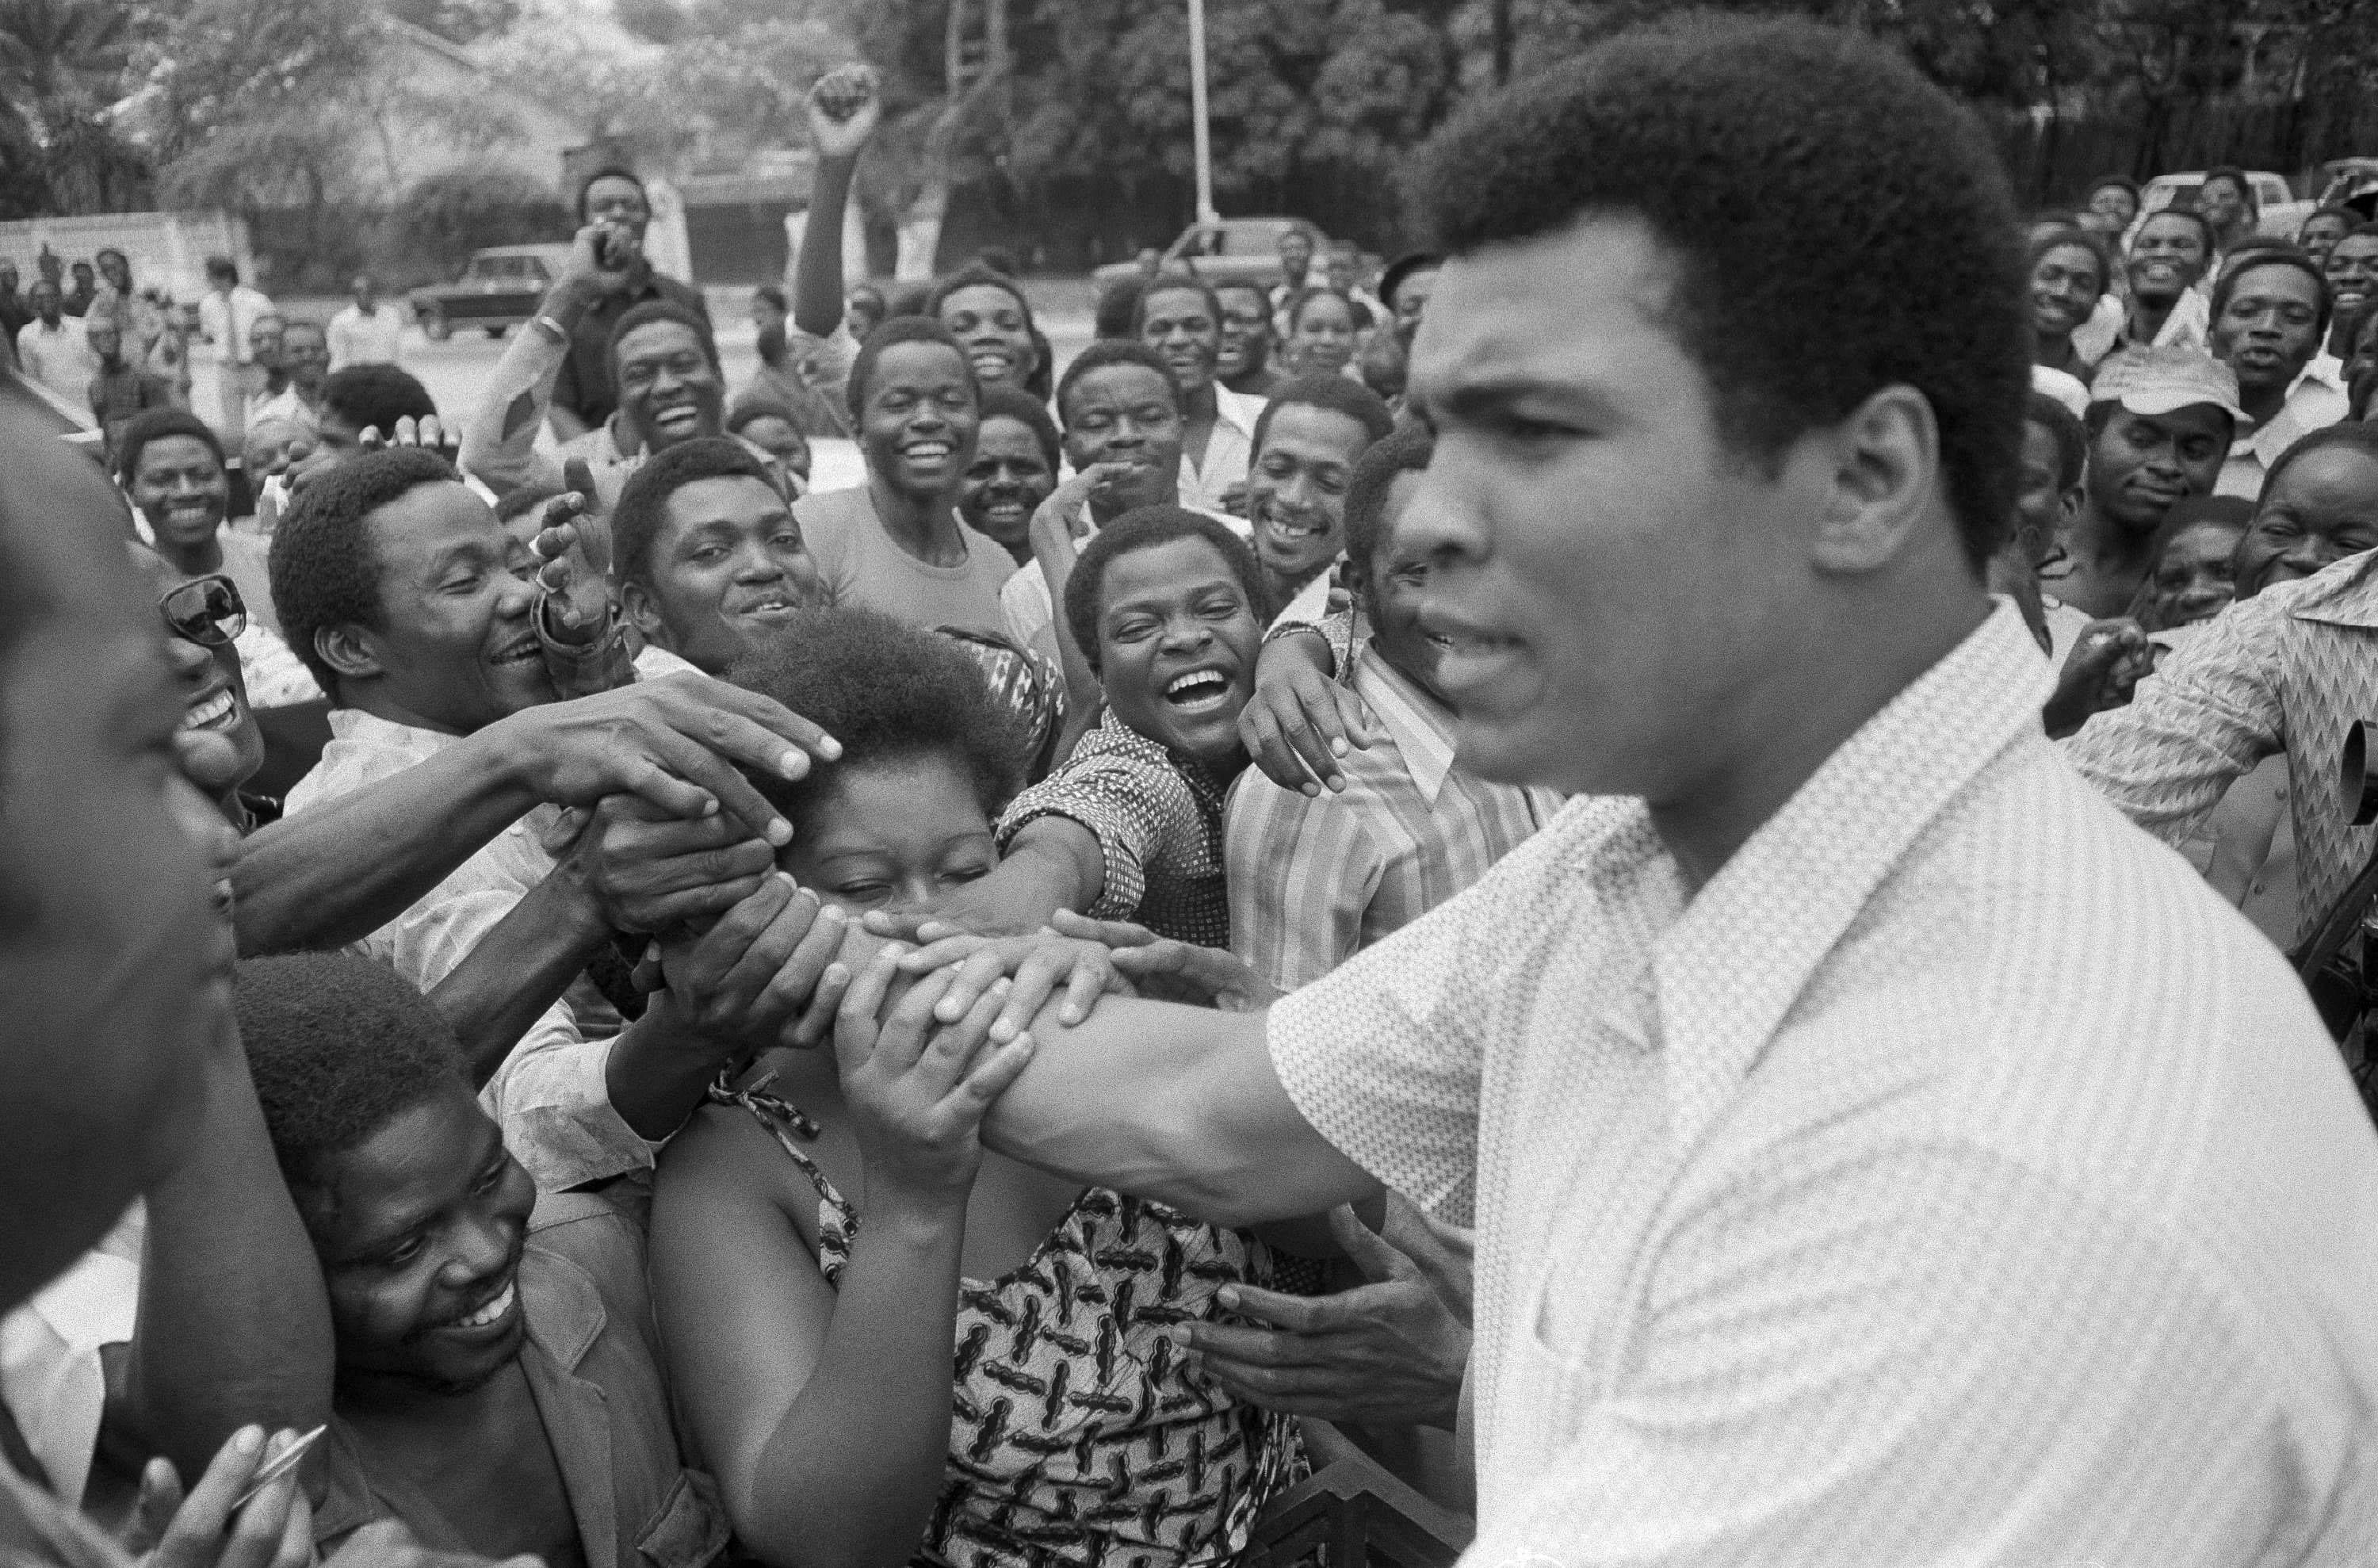 Muhammad Ali is greeted in downtown Kinshasa, Zaire, on Sept. 17, 1974. Ali was in Zaire to fight George Foreman. Ali, the magnificent heavyweight champion whose fast fists and irrepressible personality transcended sports and captivated the world, died on Friday, June 3, 2016. He was 74.